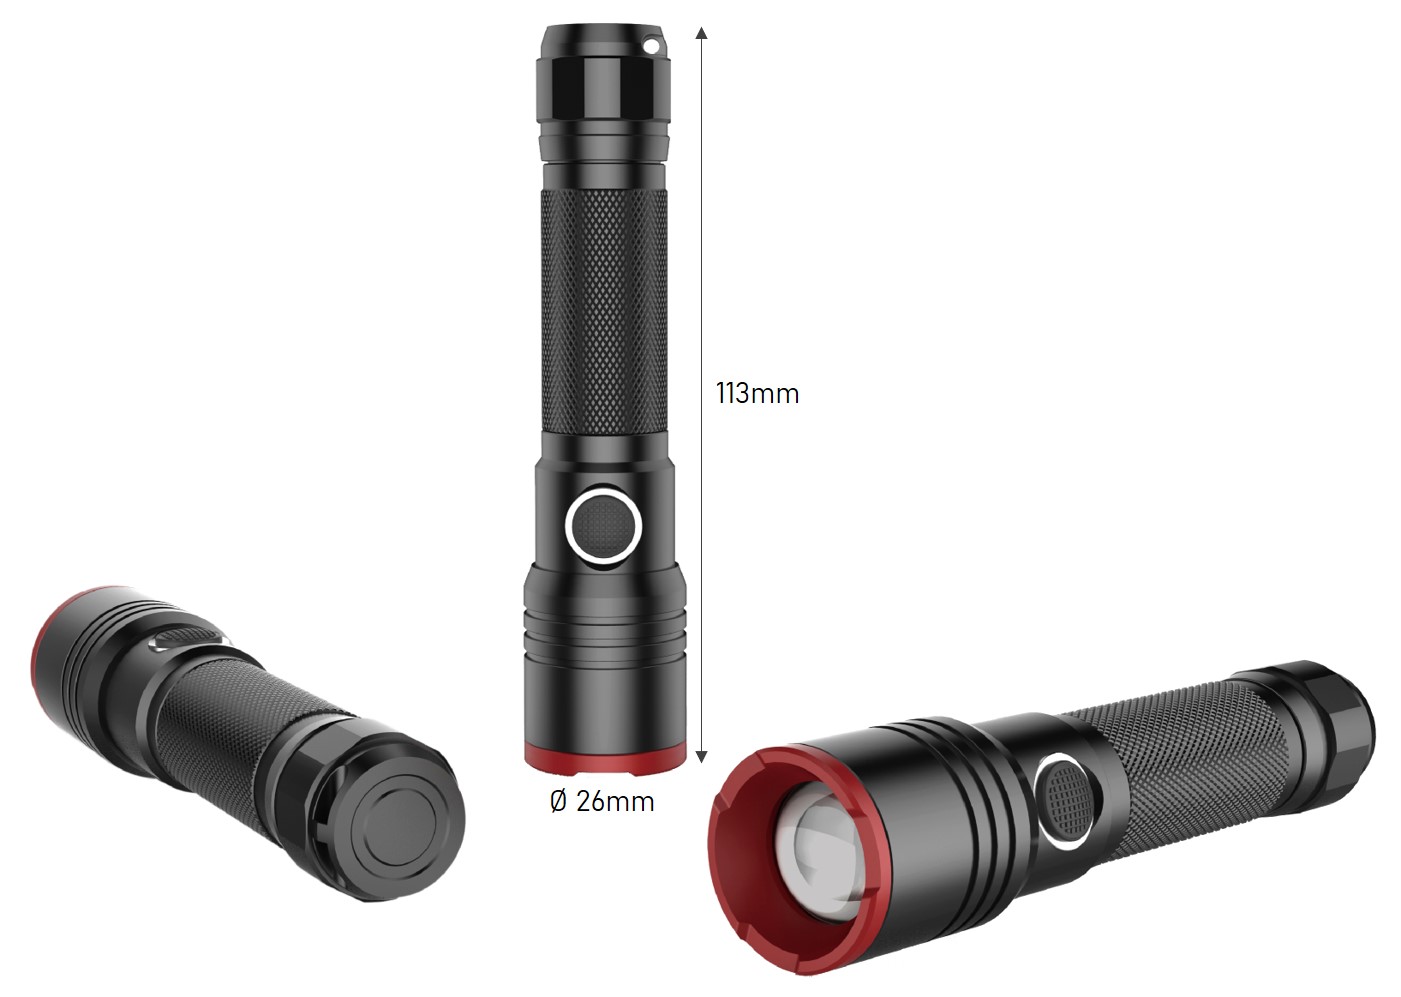 Midi-Lux - LED flashlight with up to 450 lumens